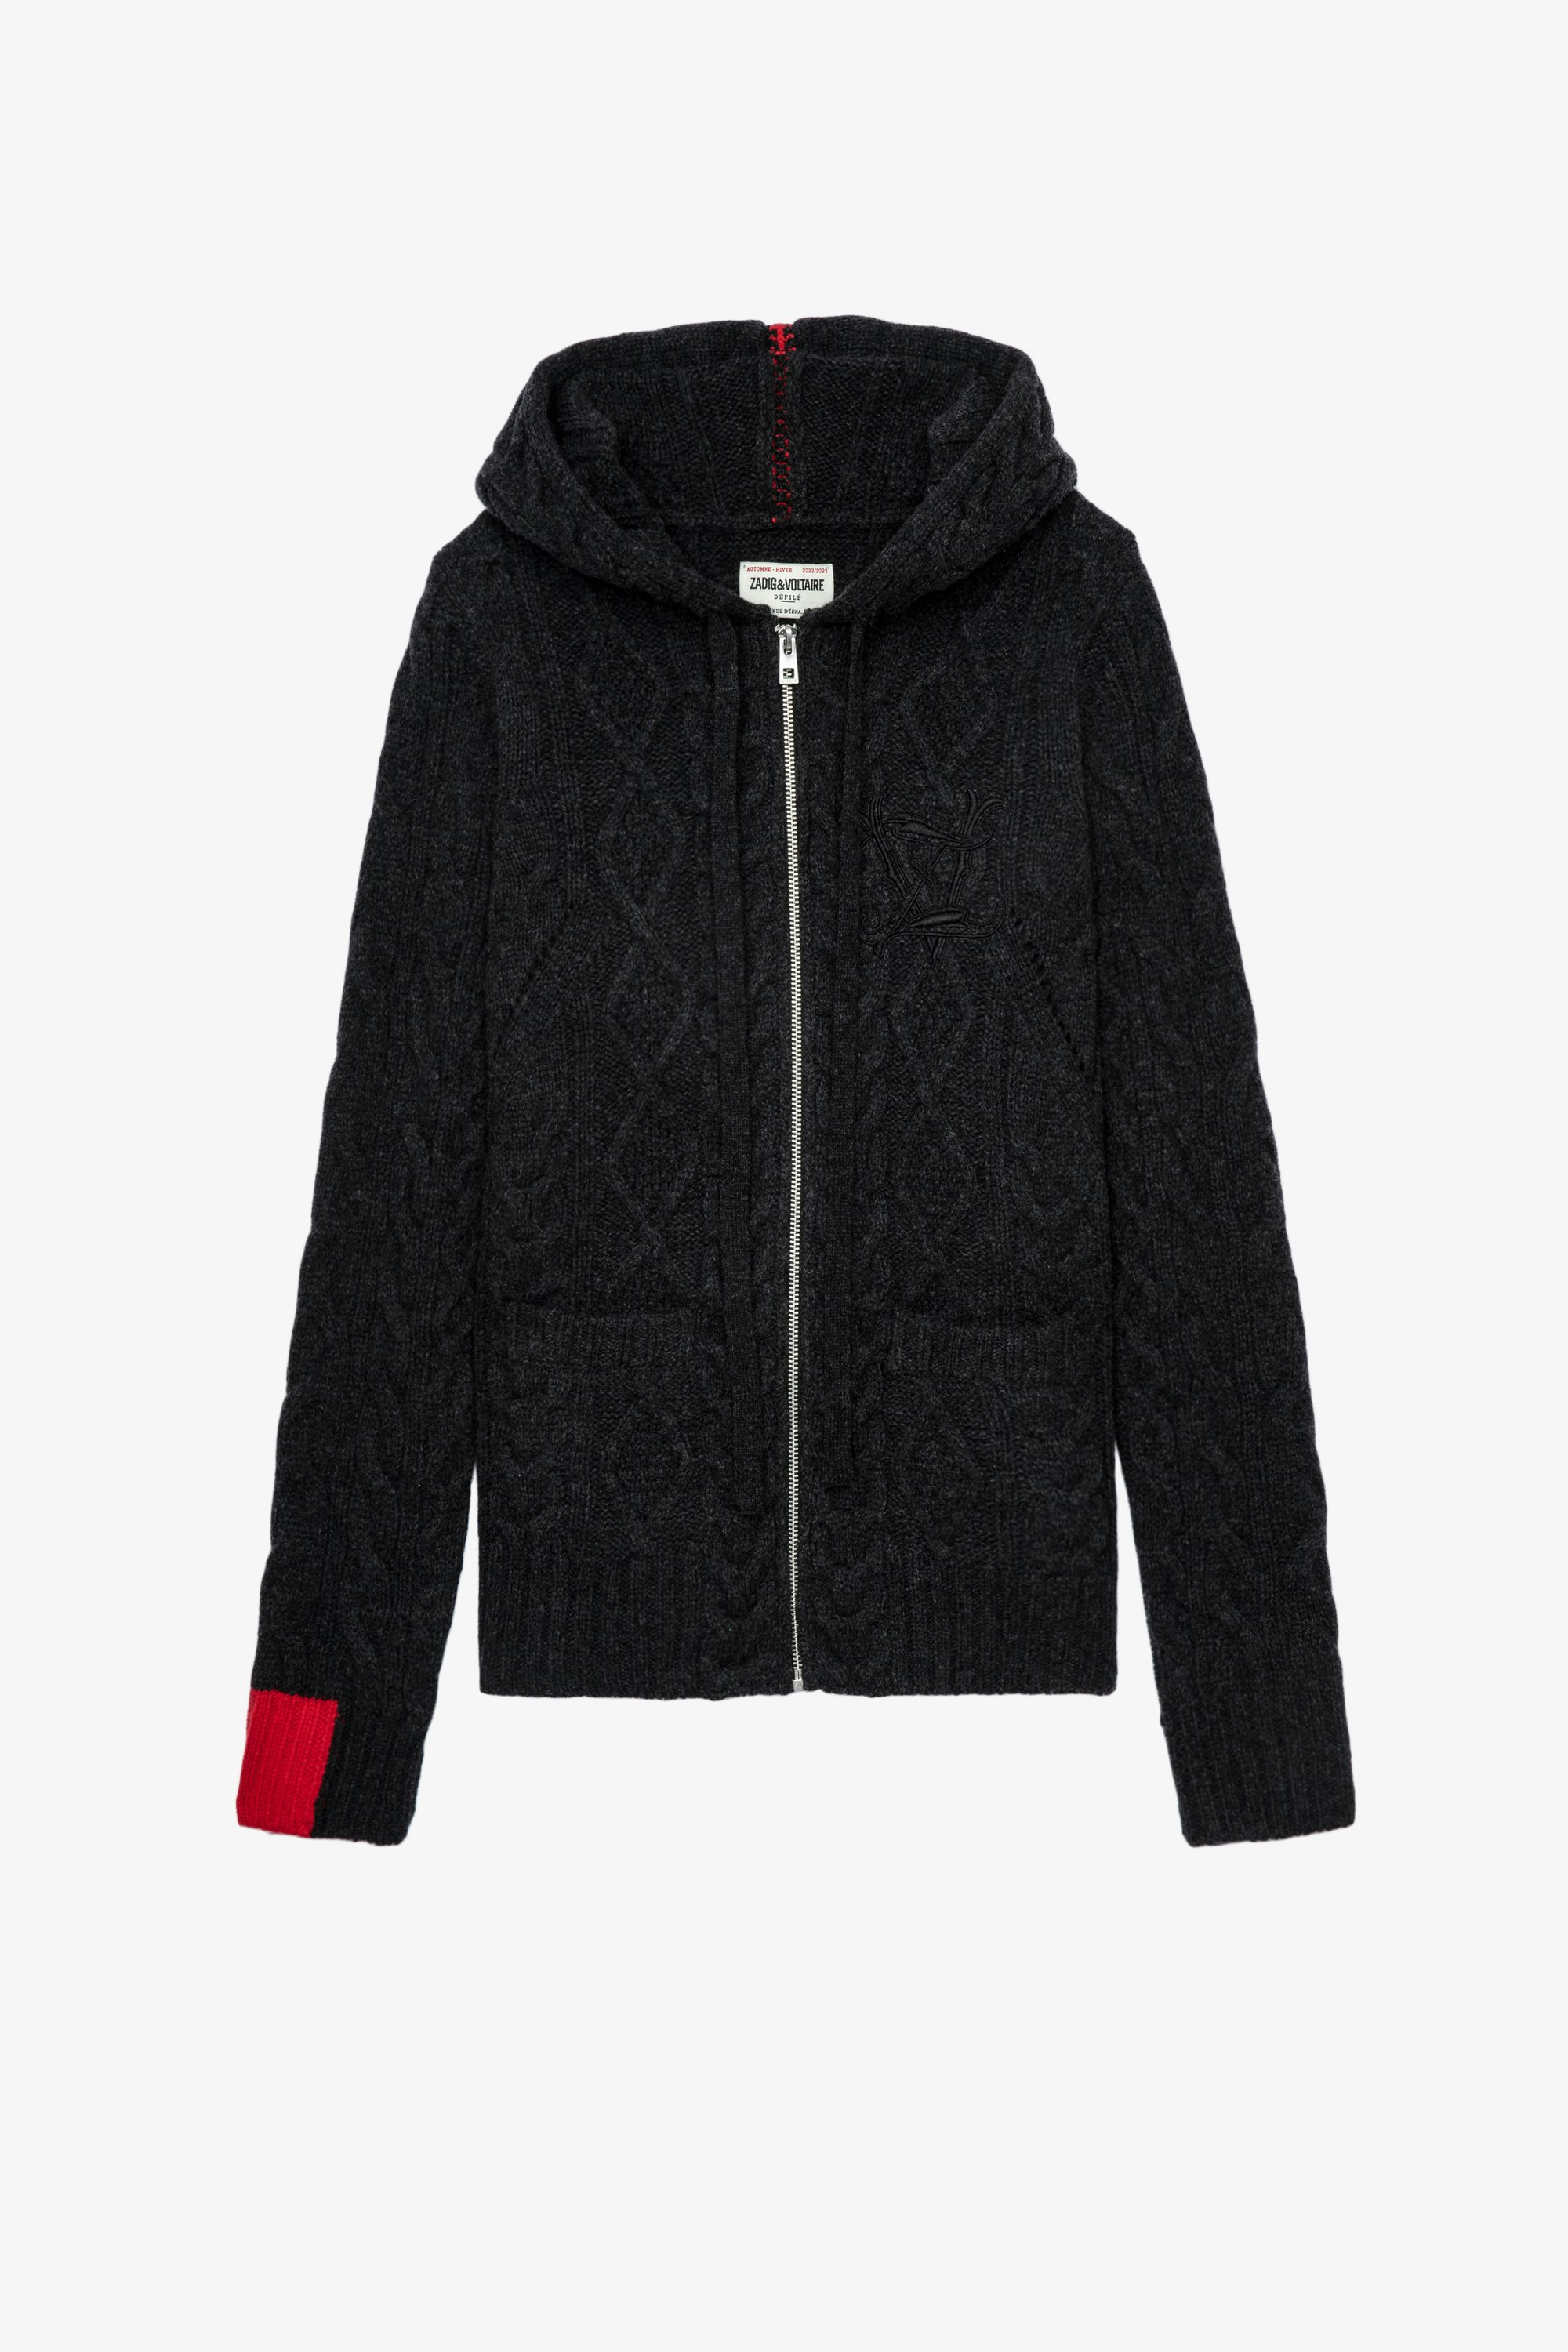 Cassyn カーディガン Women’s anthracite cardigan with hood and contrasting piping